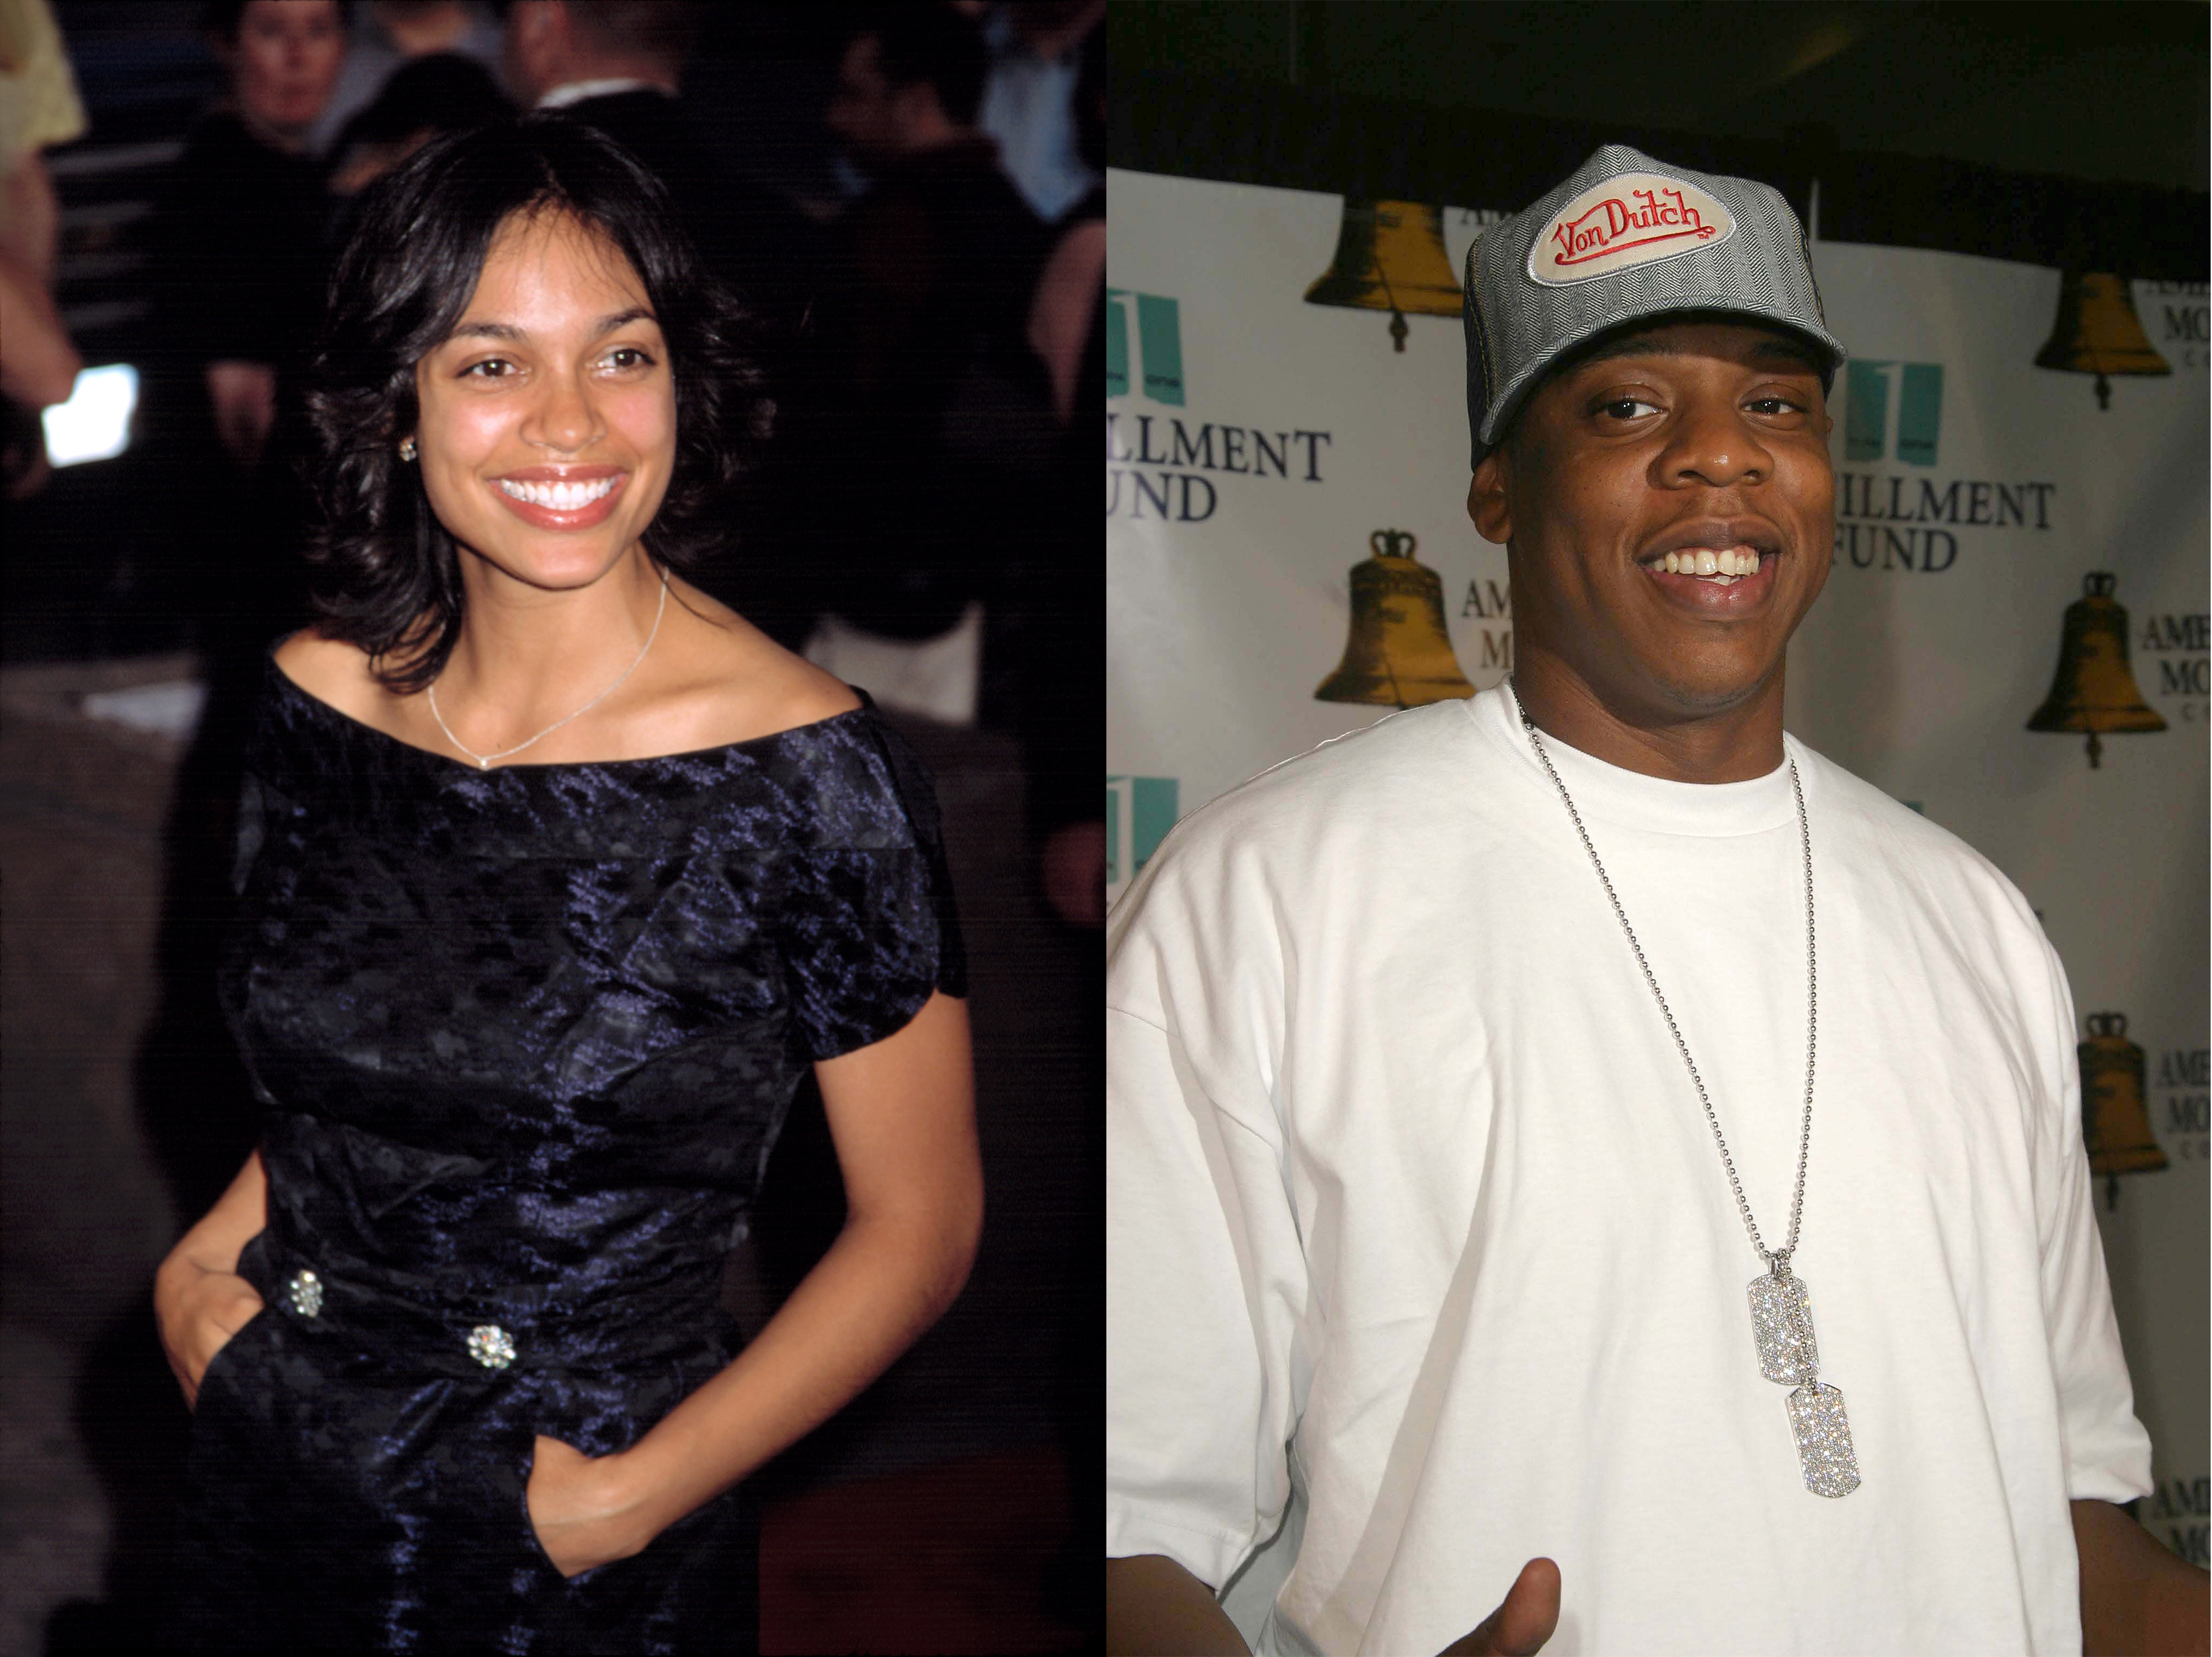 Rosario Dawson and Jay Z in the early 2000s